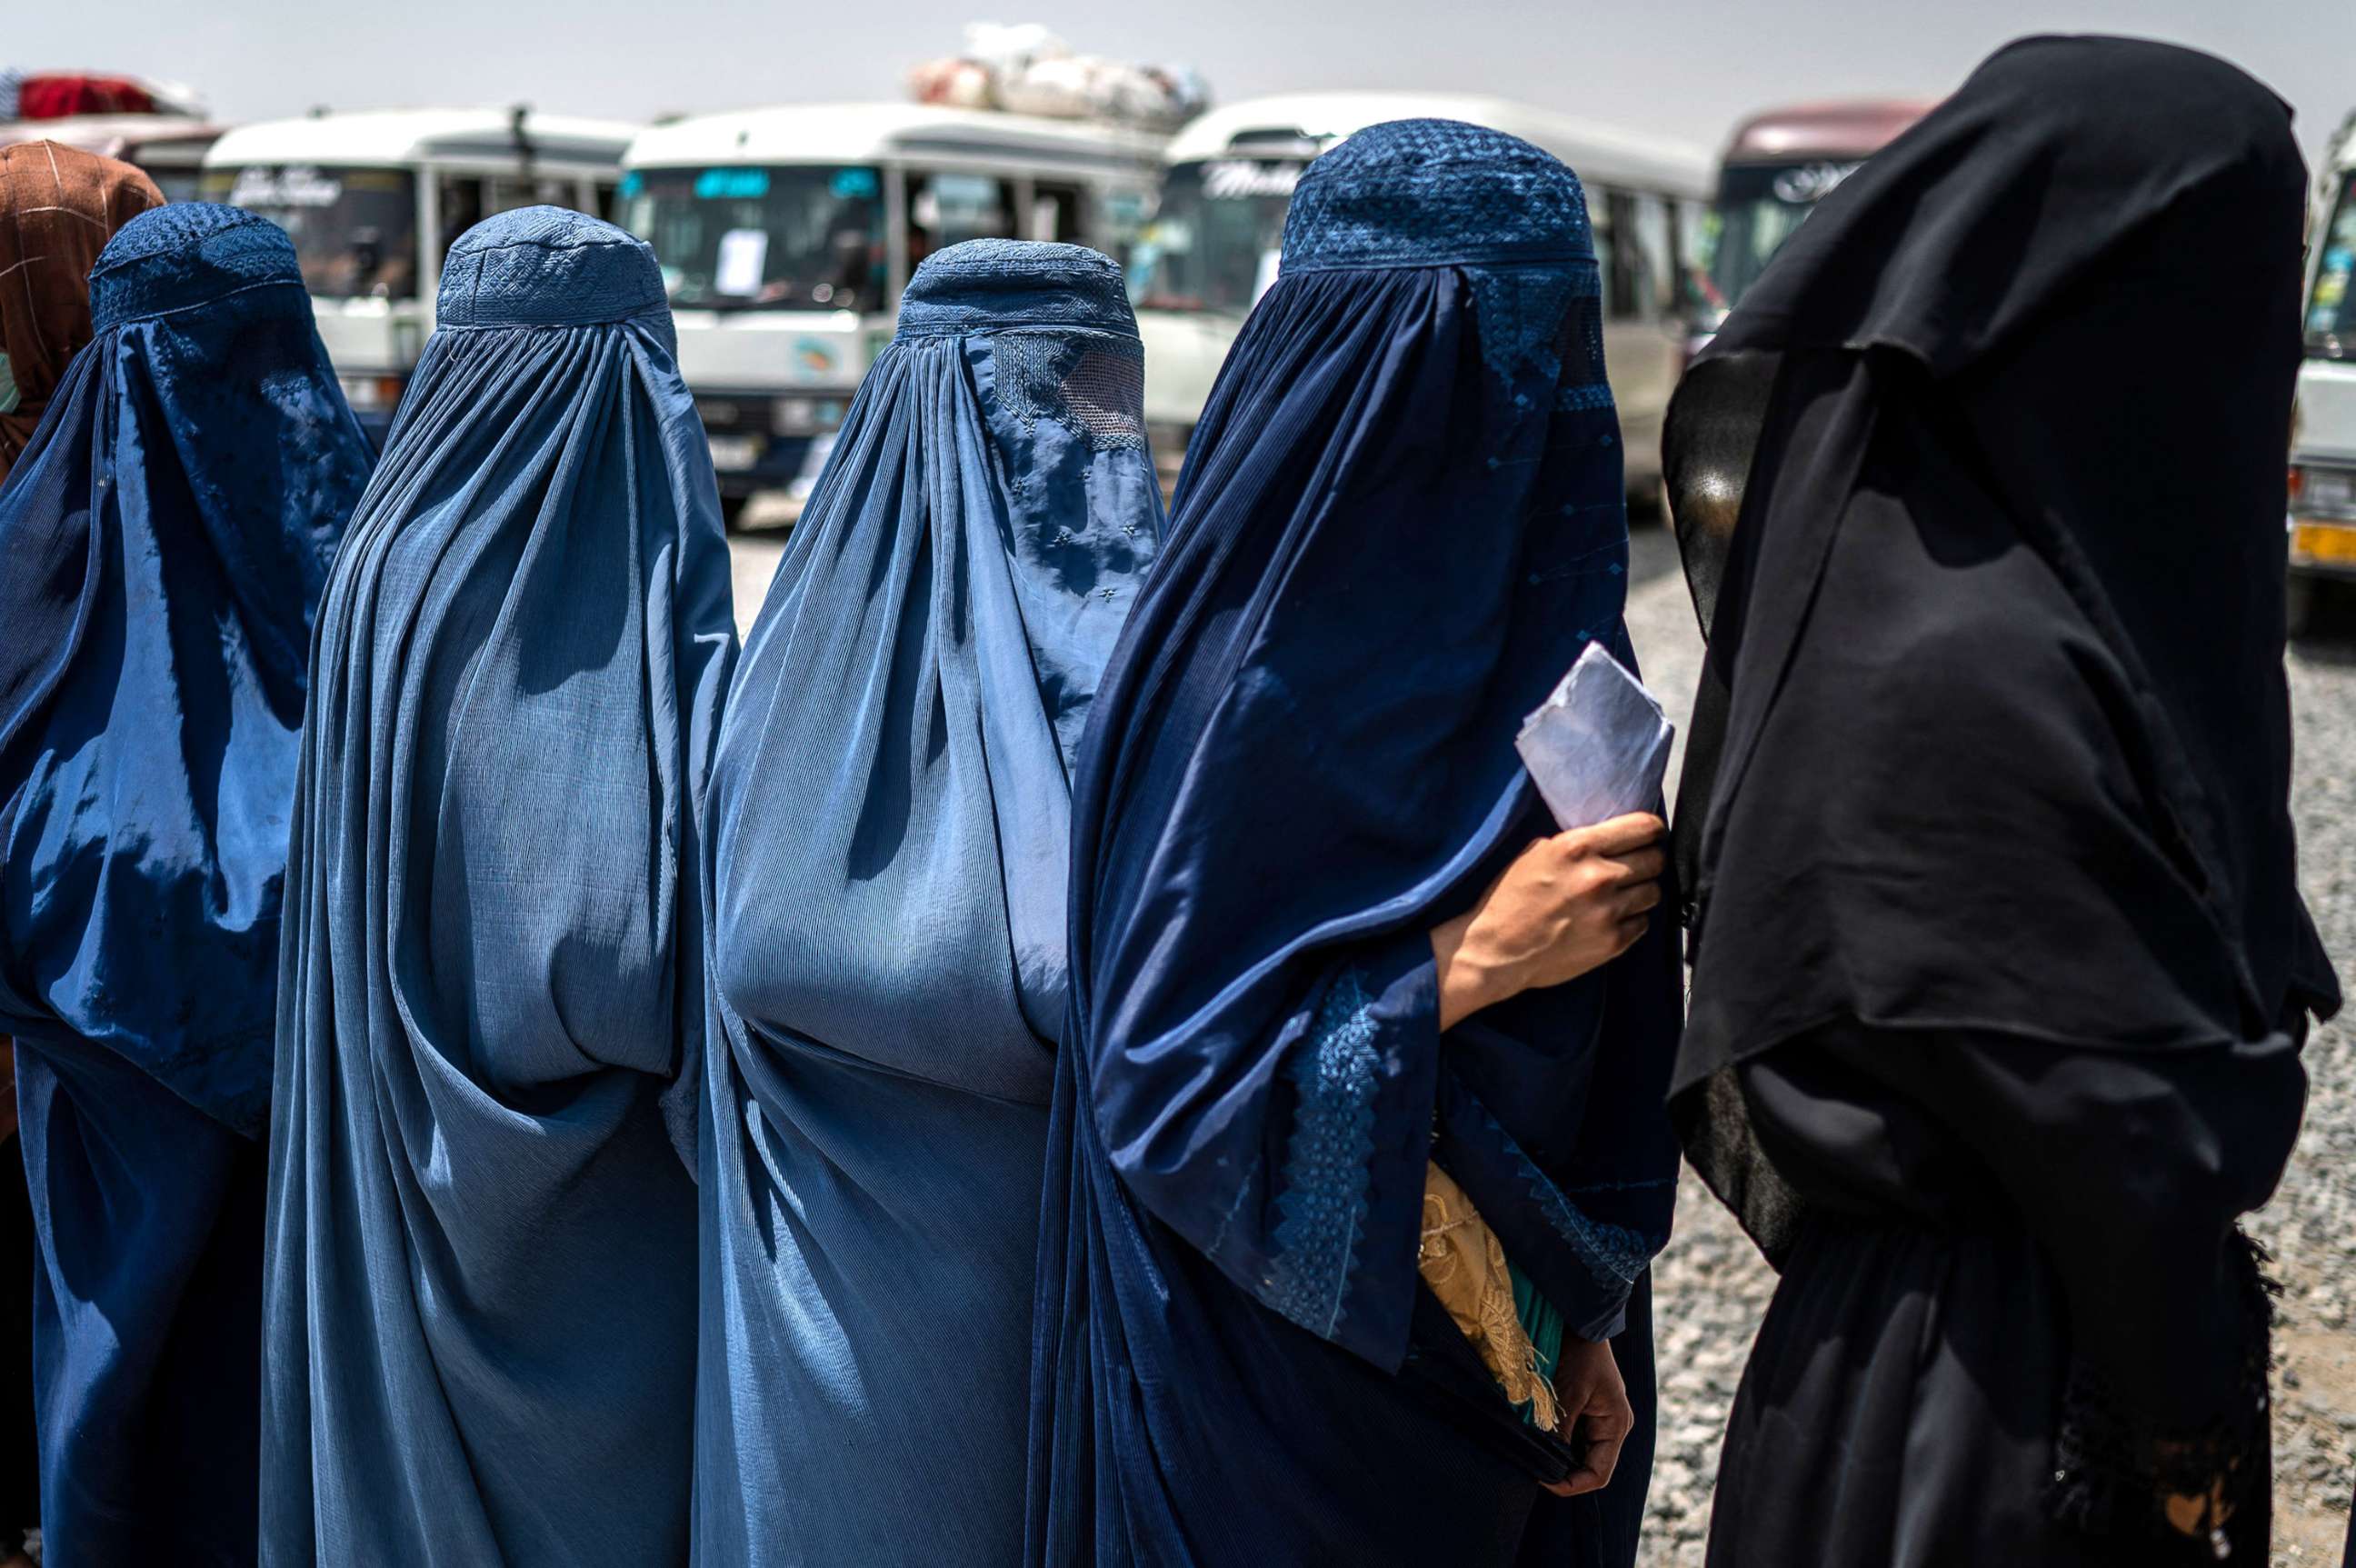 PHOTO: Afghan internally displaced refugee women stand in a queue to identify themselves and receive money as they return home to the east, at the United Nations High Commissioner for Refugees (UNHCR) camp in the outskirts of Kabul on July 28, 2022.